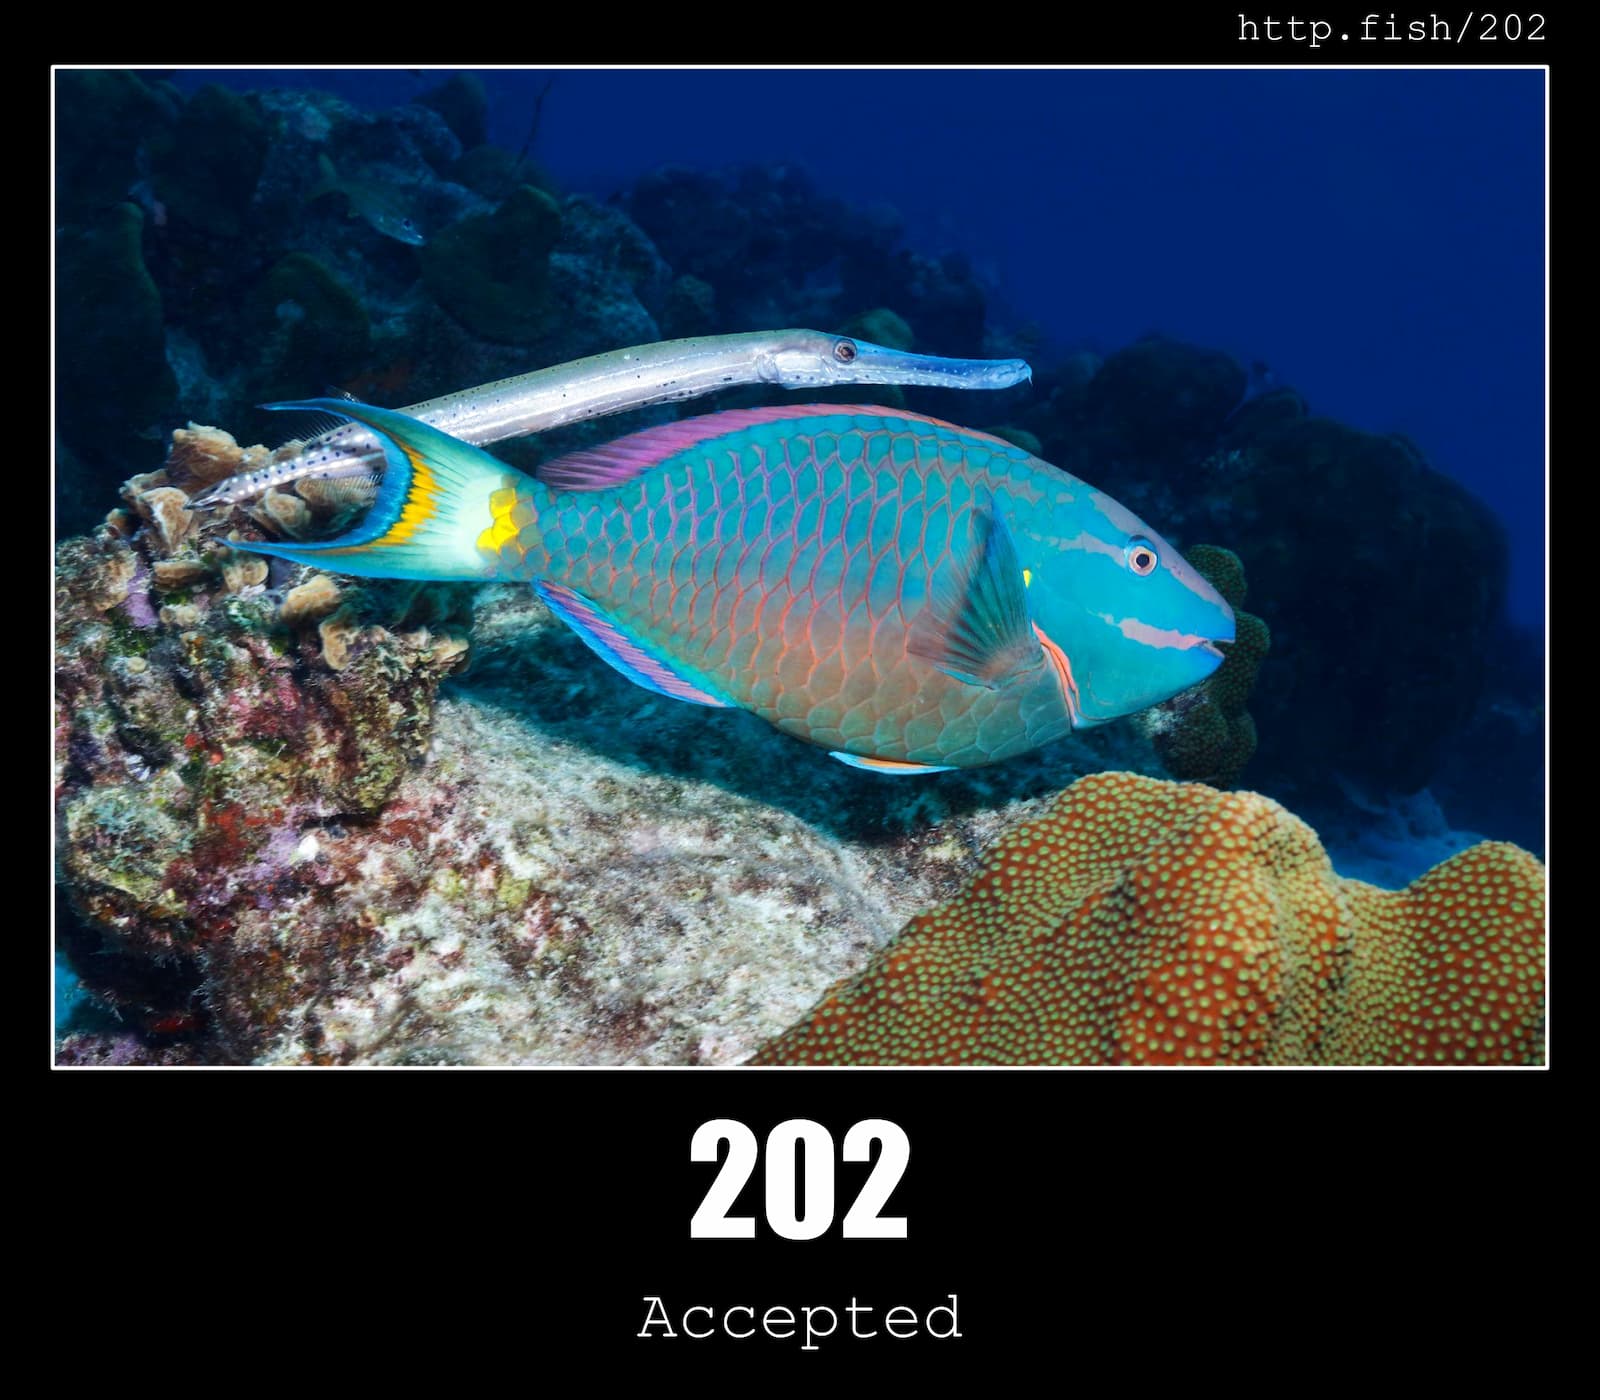 HTTP Status Code 202 Accepted & Fish